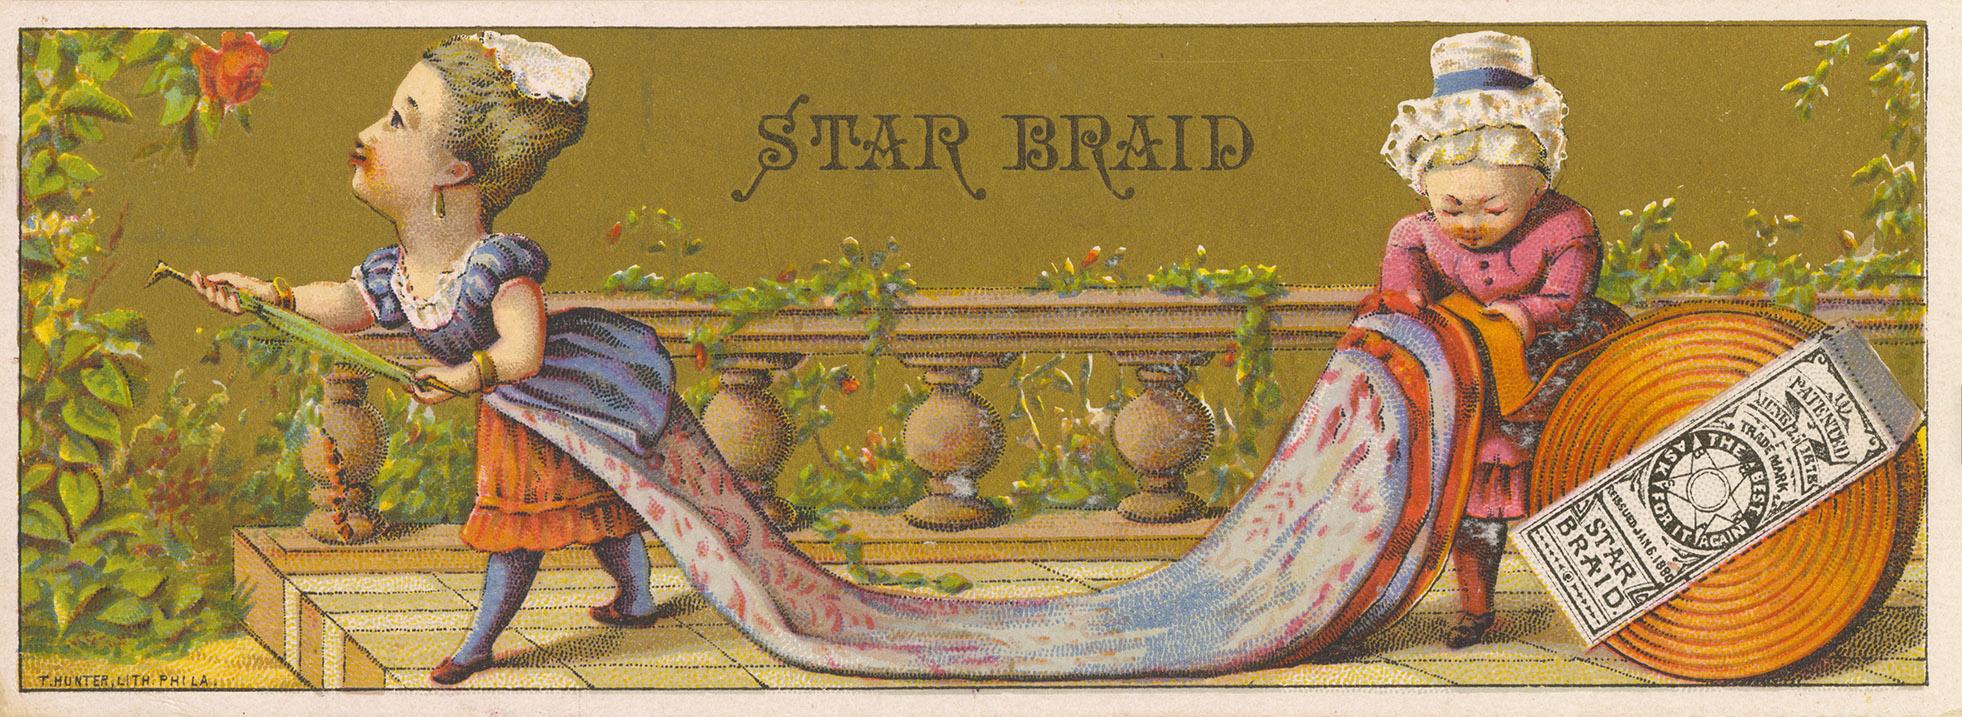 Two women with Star Braid